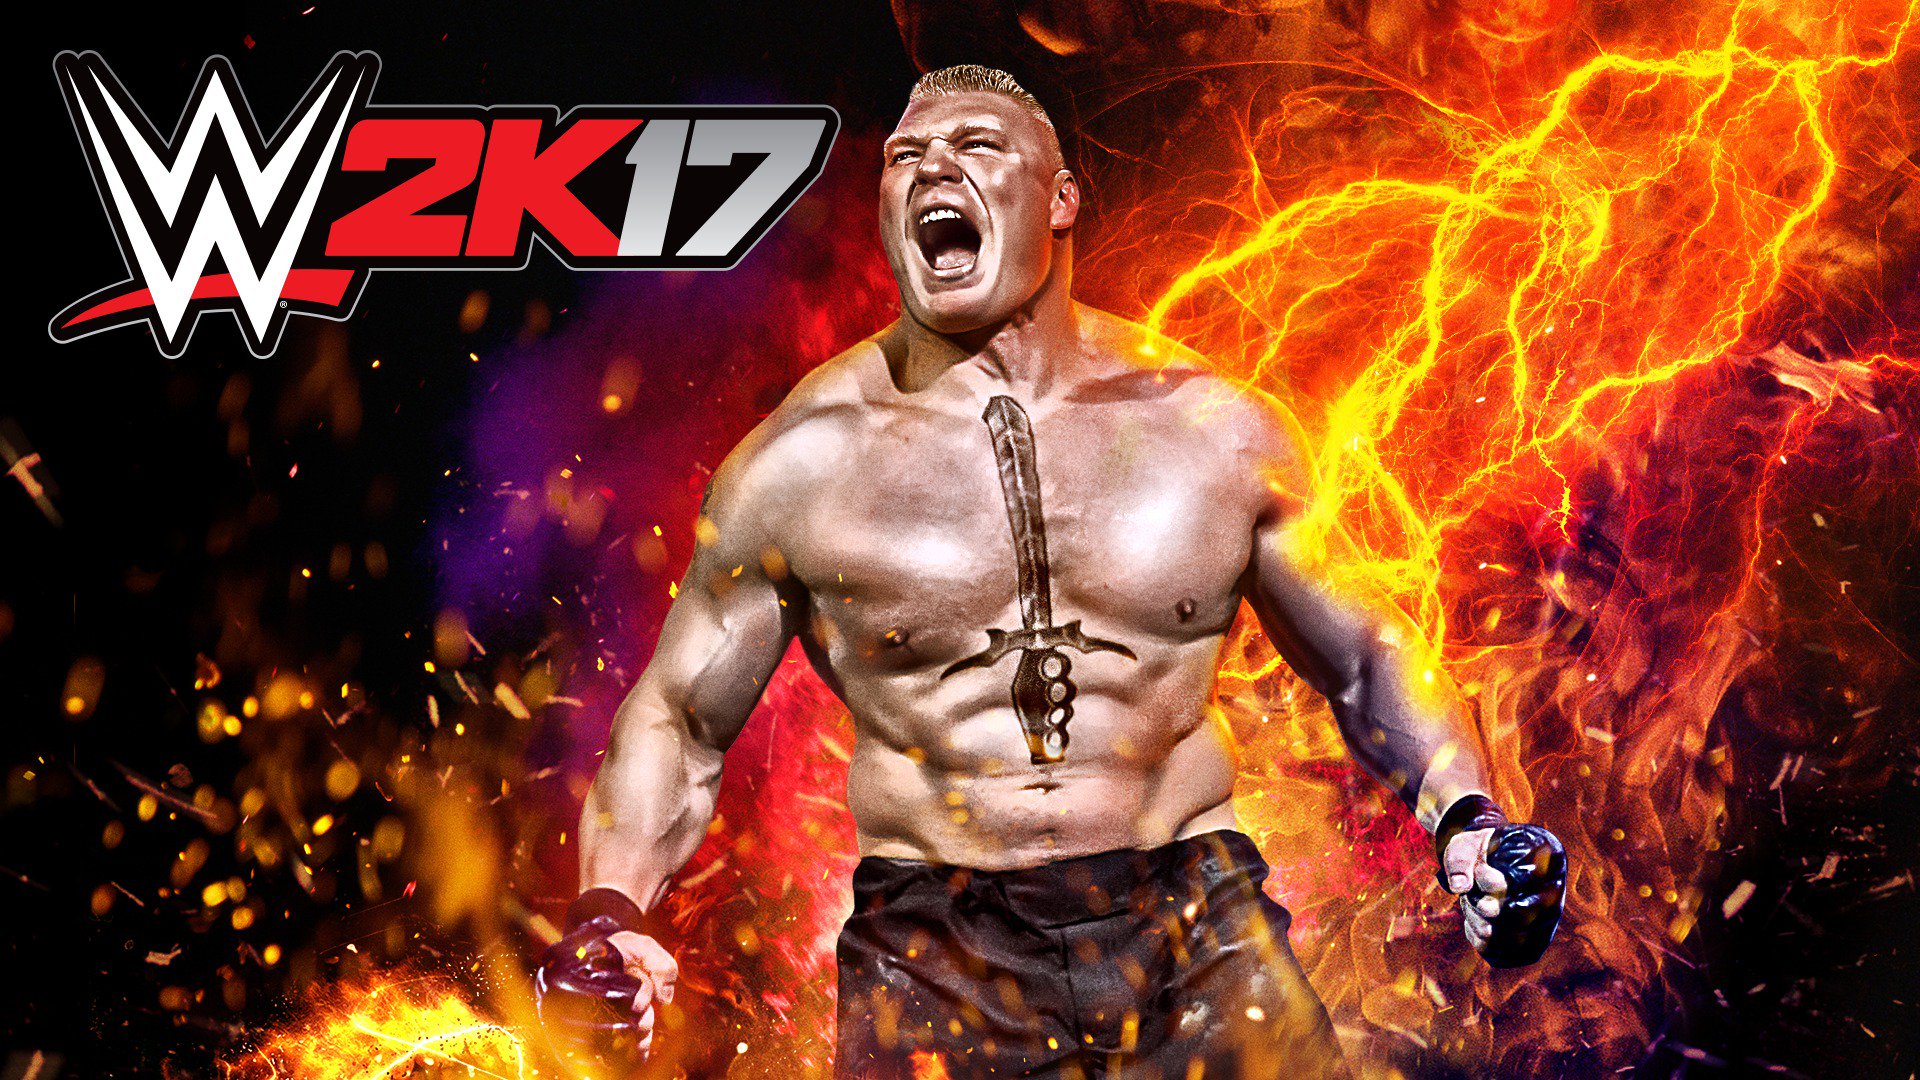 Brock Lesnar S Big Year Continues As He S Featured On The Wwe 2k17 Cover Sporting News